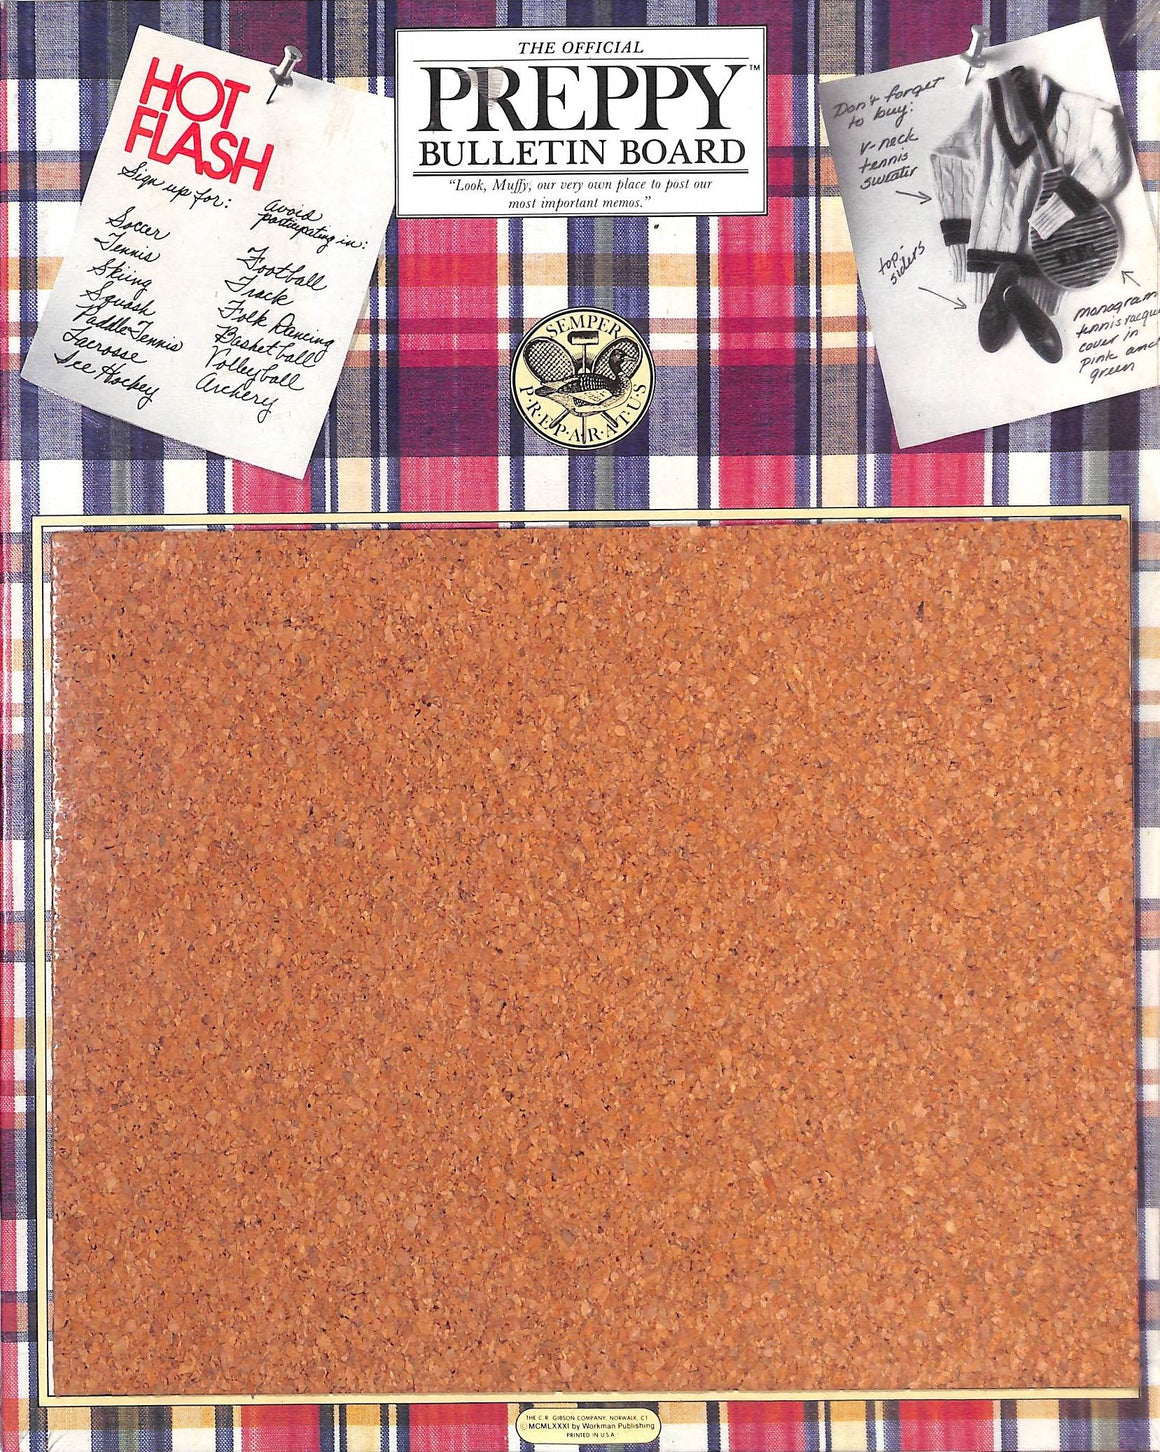 "The Official Preppy Bulletin Board" 1981 (New/ Old Stock/ Still Shrink Wrapped!) (SOLD)